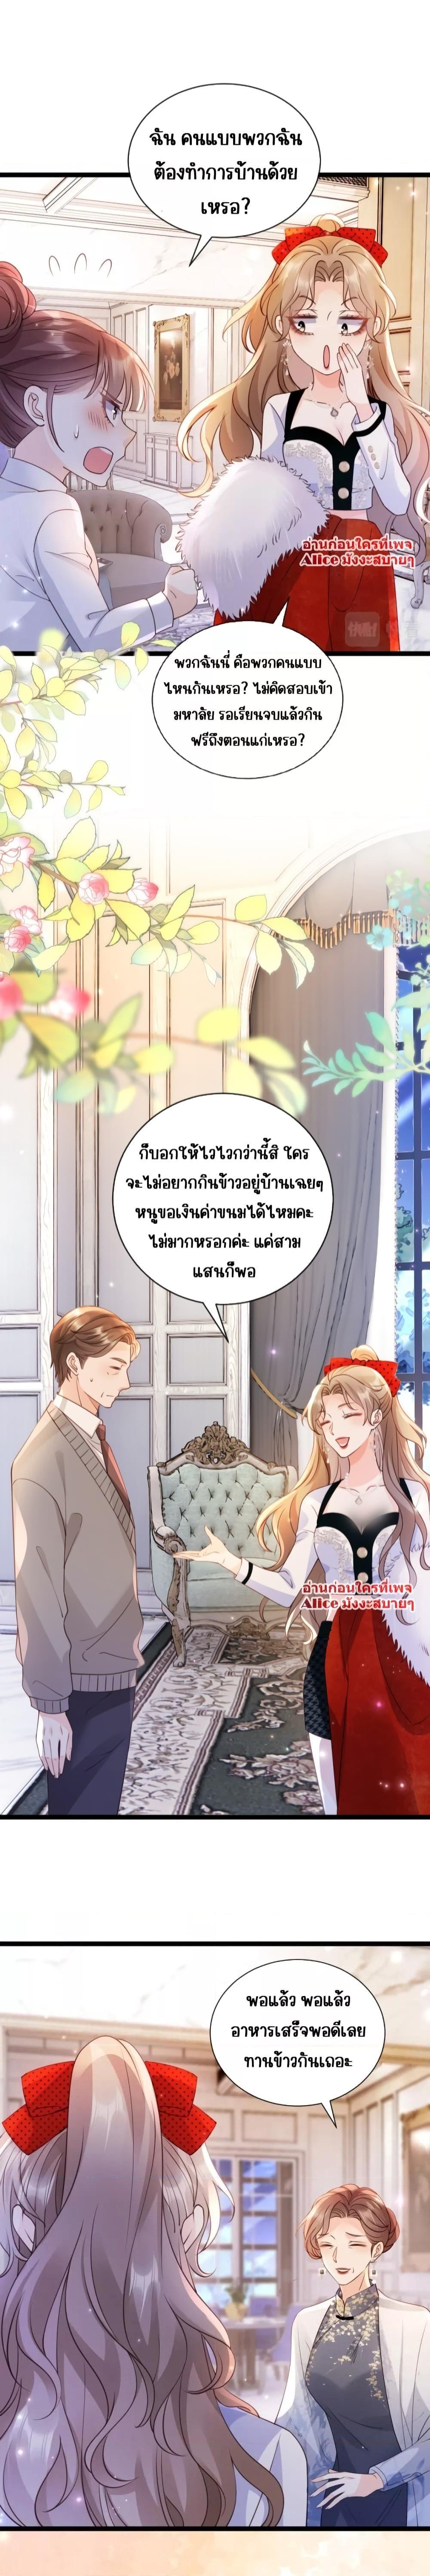 Goxuewen Female Supporting Role She Quit โ€“ เธเธญเธเธฐเธ—เธตเธเธฑเธเธเธ—เธขเธฑเธขเธ•เธฑเธงเธฃเนเธฒเธขเนเธเธเธดเธขเธฒเธขเธเนเธณเน€เธเนเธฒ เธ•เธญเธเธ—เธตเน 7 (12)